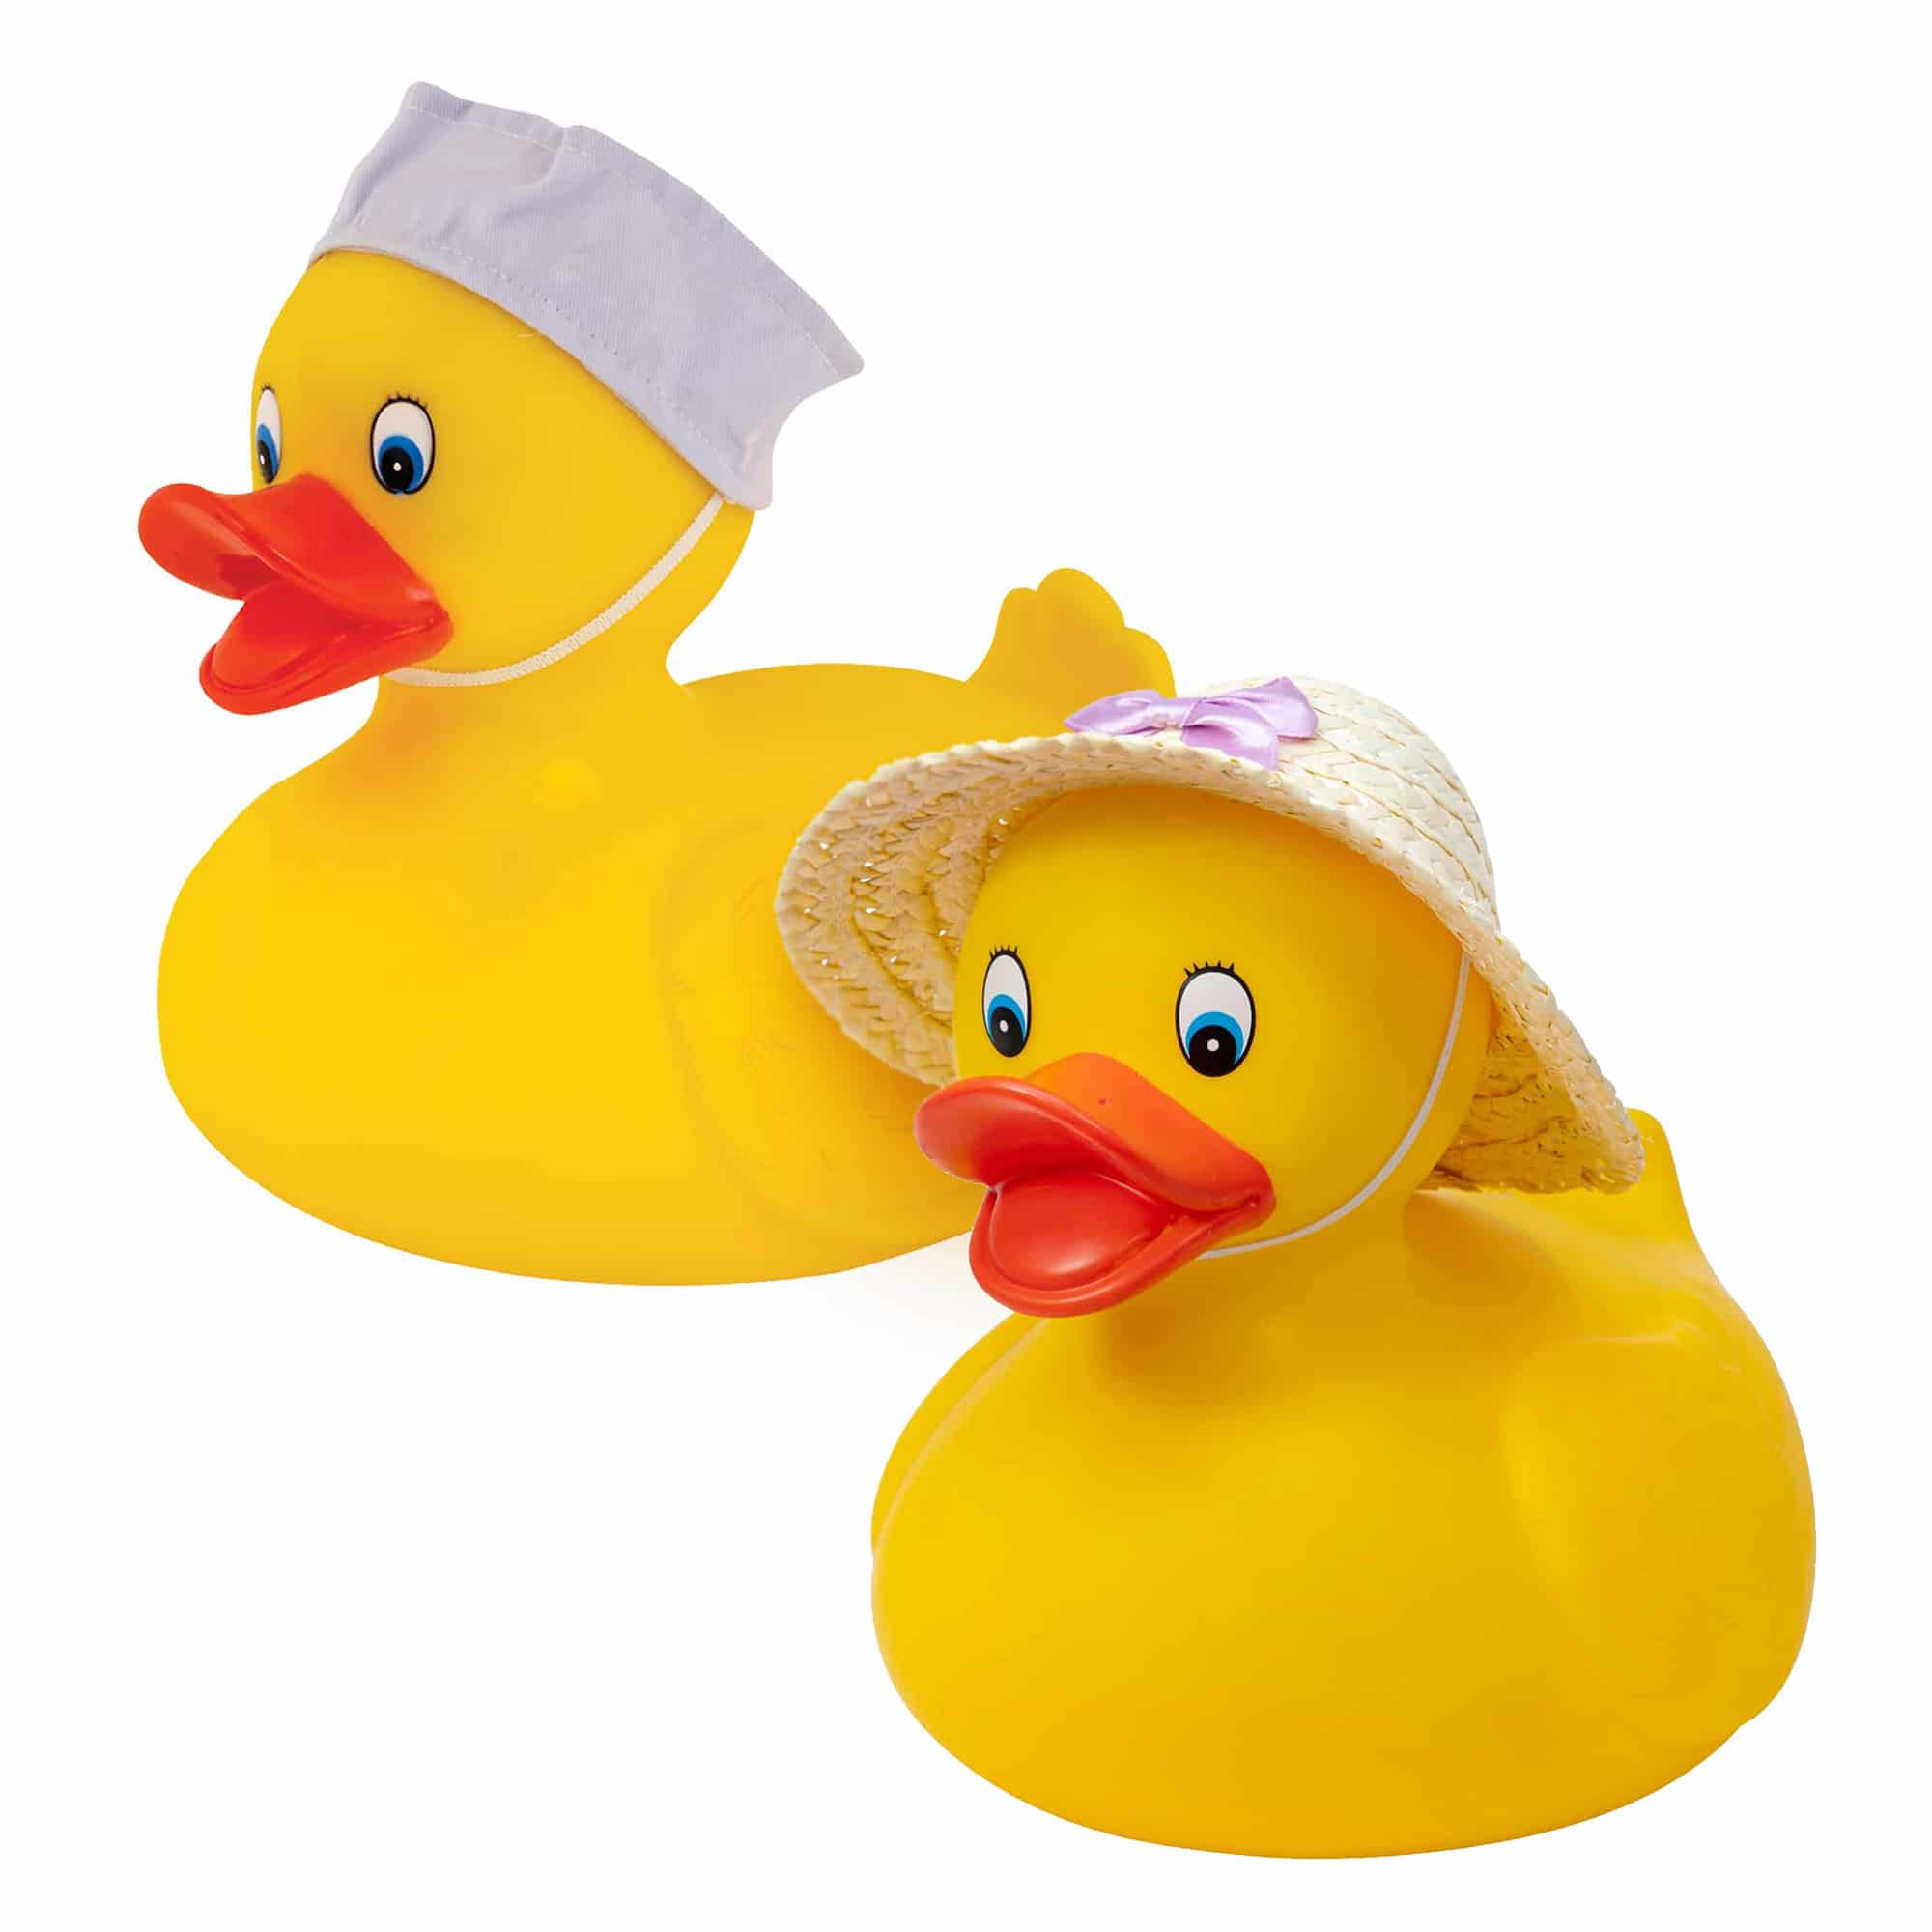 Schylling Large Classic Yellow Rubber Ducky (10in tall, styles vary) - image 1 of 7